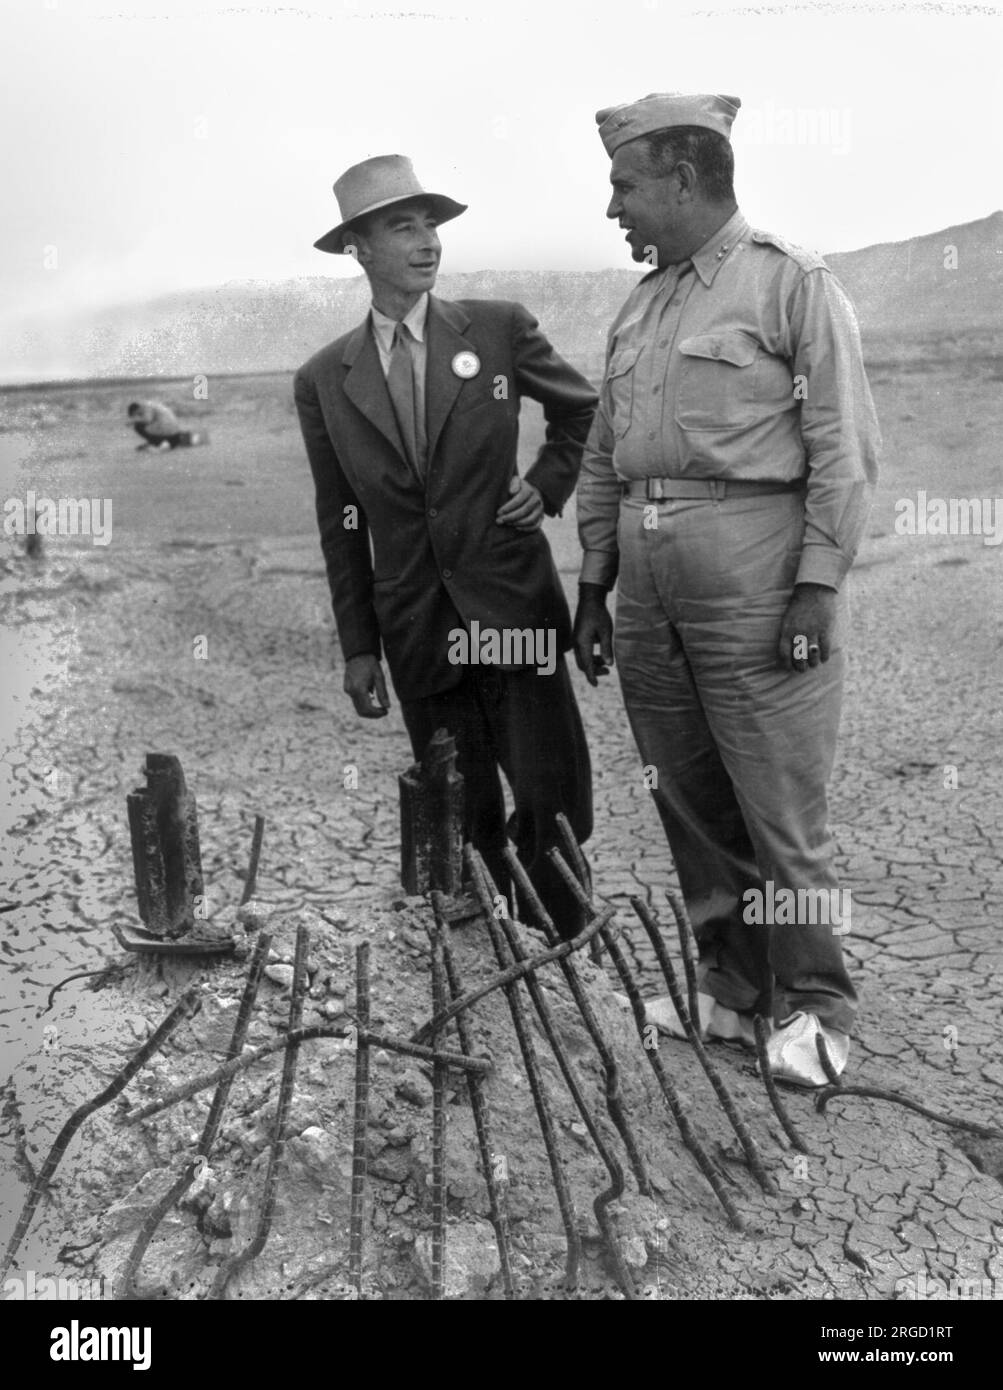 In September 1945, many participants returned to the Trinity Test site for news crews. Here Robert Oppenheimer and General Leslie Groves examine the remains of one the bases of the steel test tower. Stock Photo